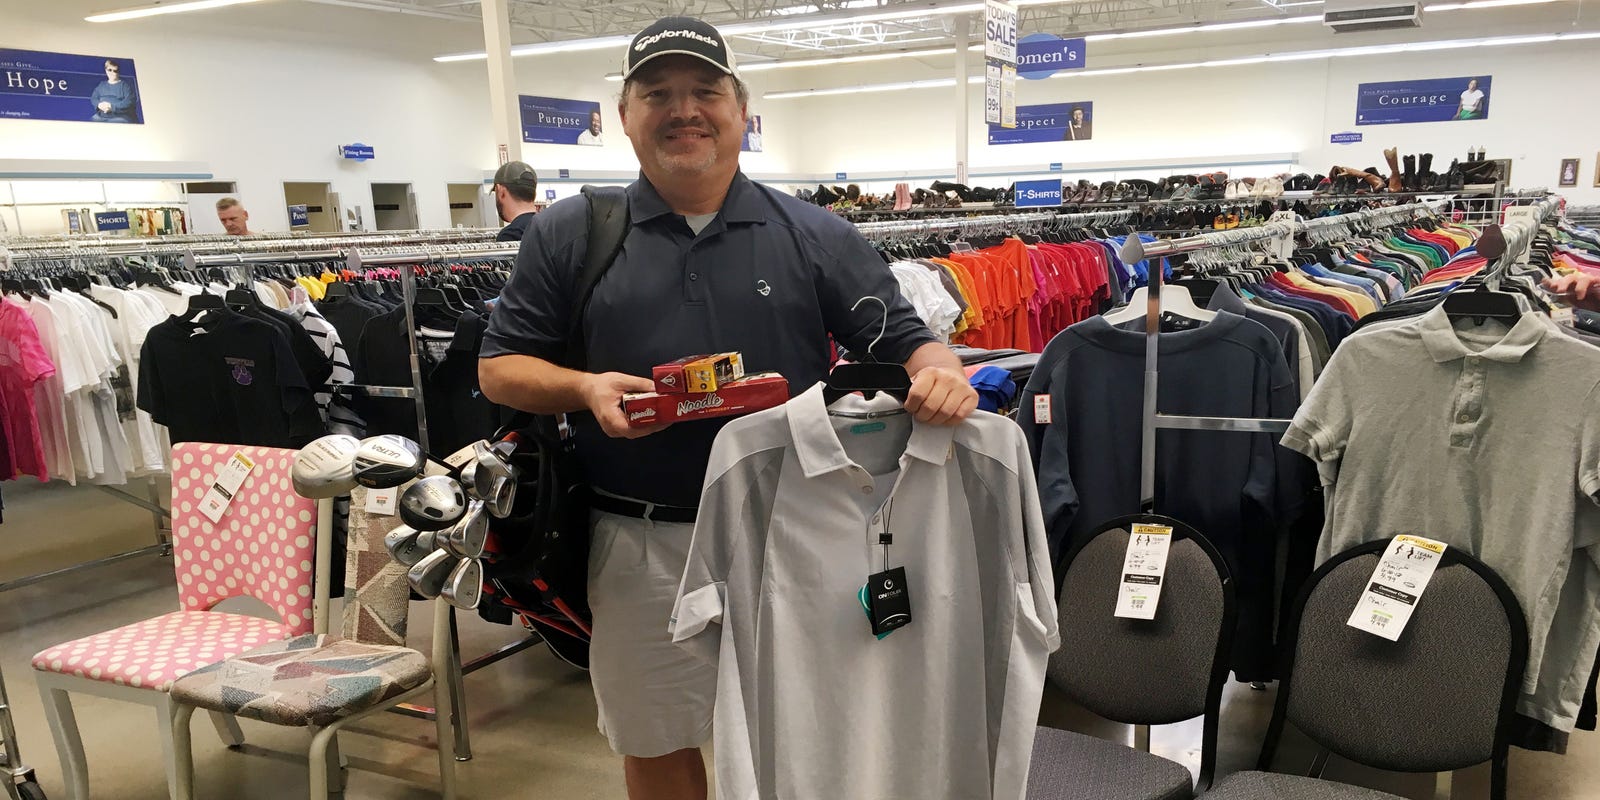 inspanning Professor lokaal Discount golf: Goodwill prices inspire retired teacher to take up sport